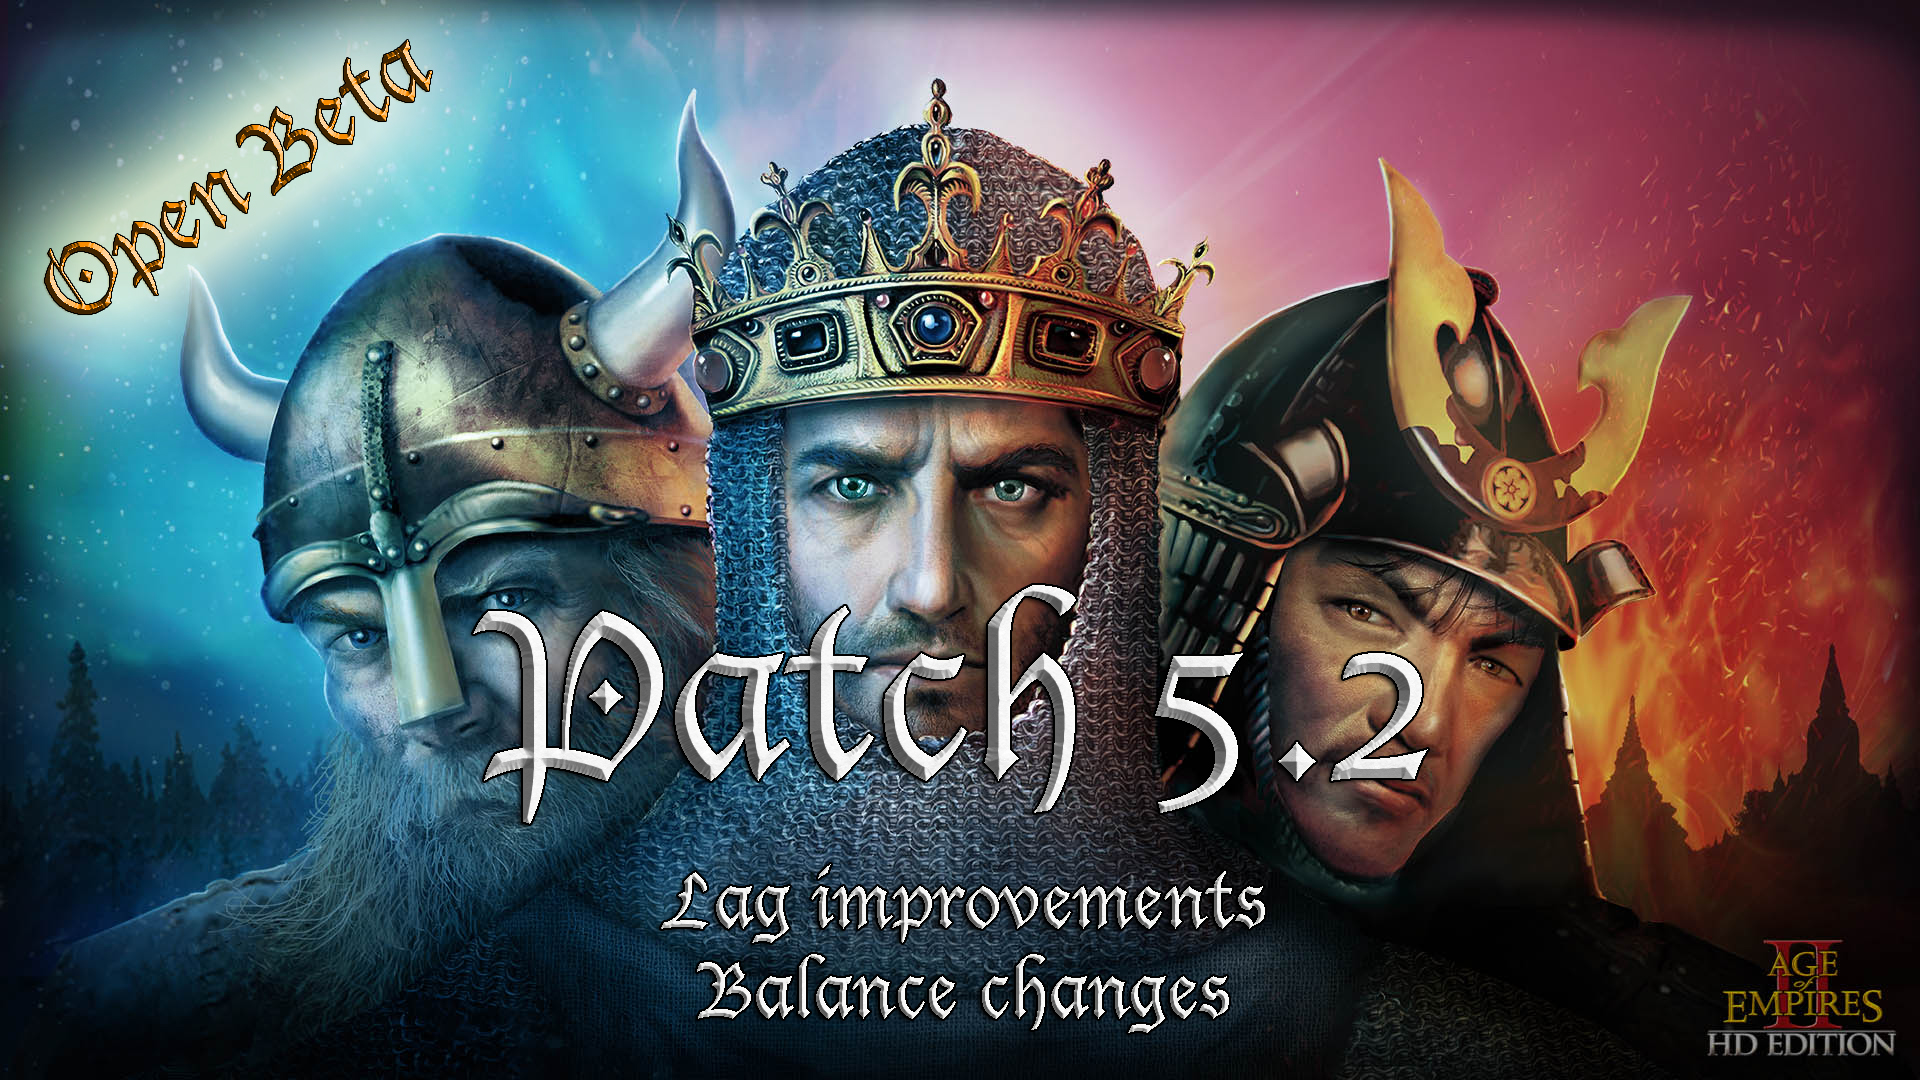 age of empires 2 update patch